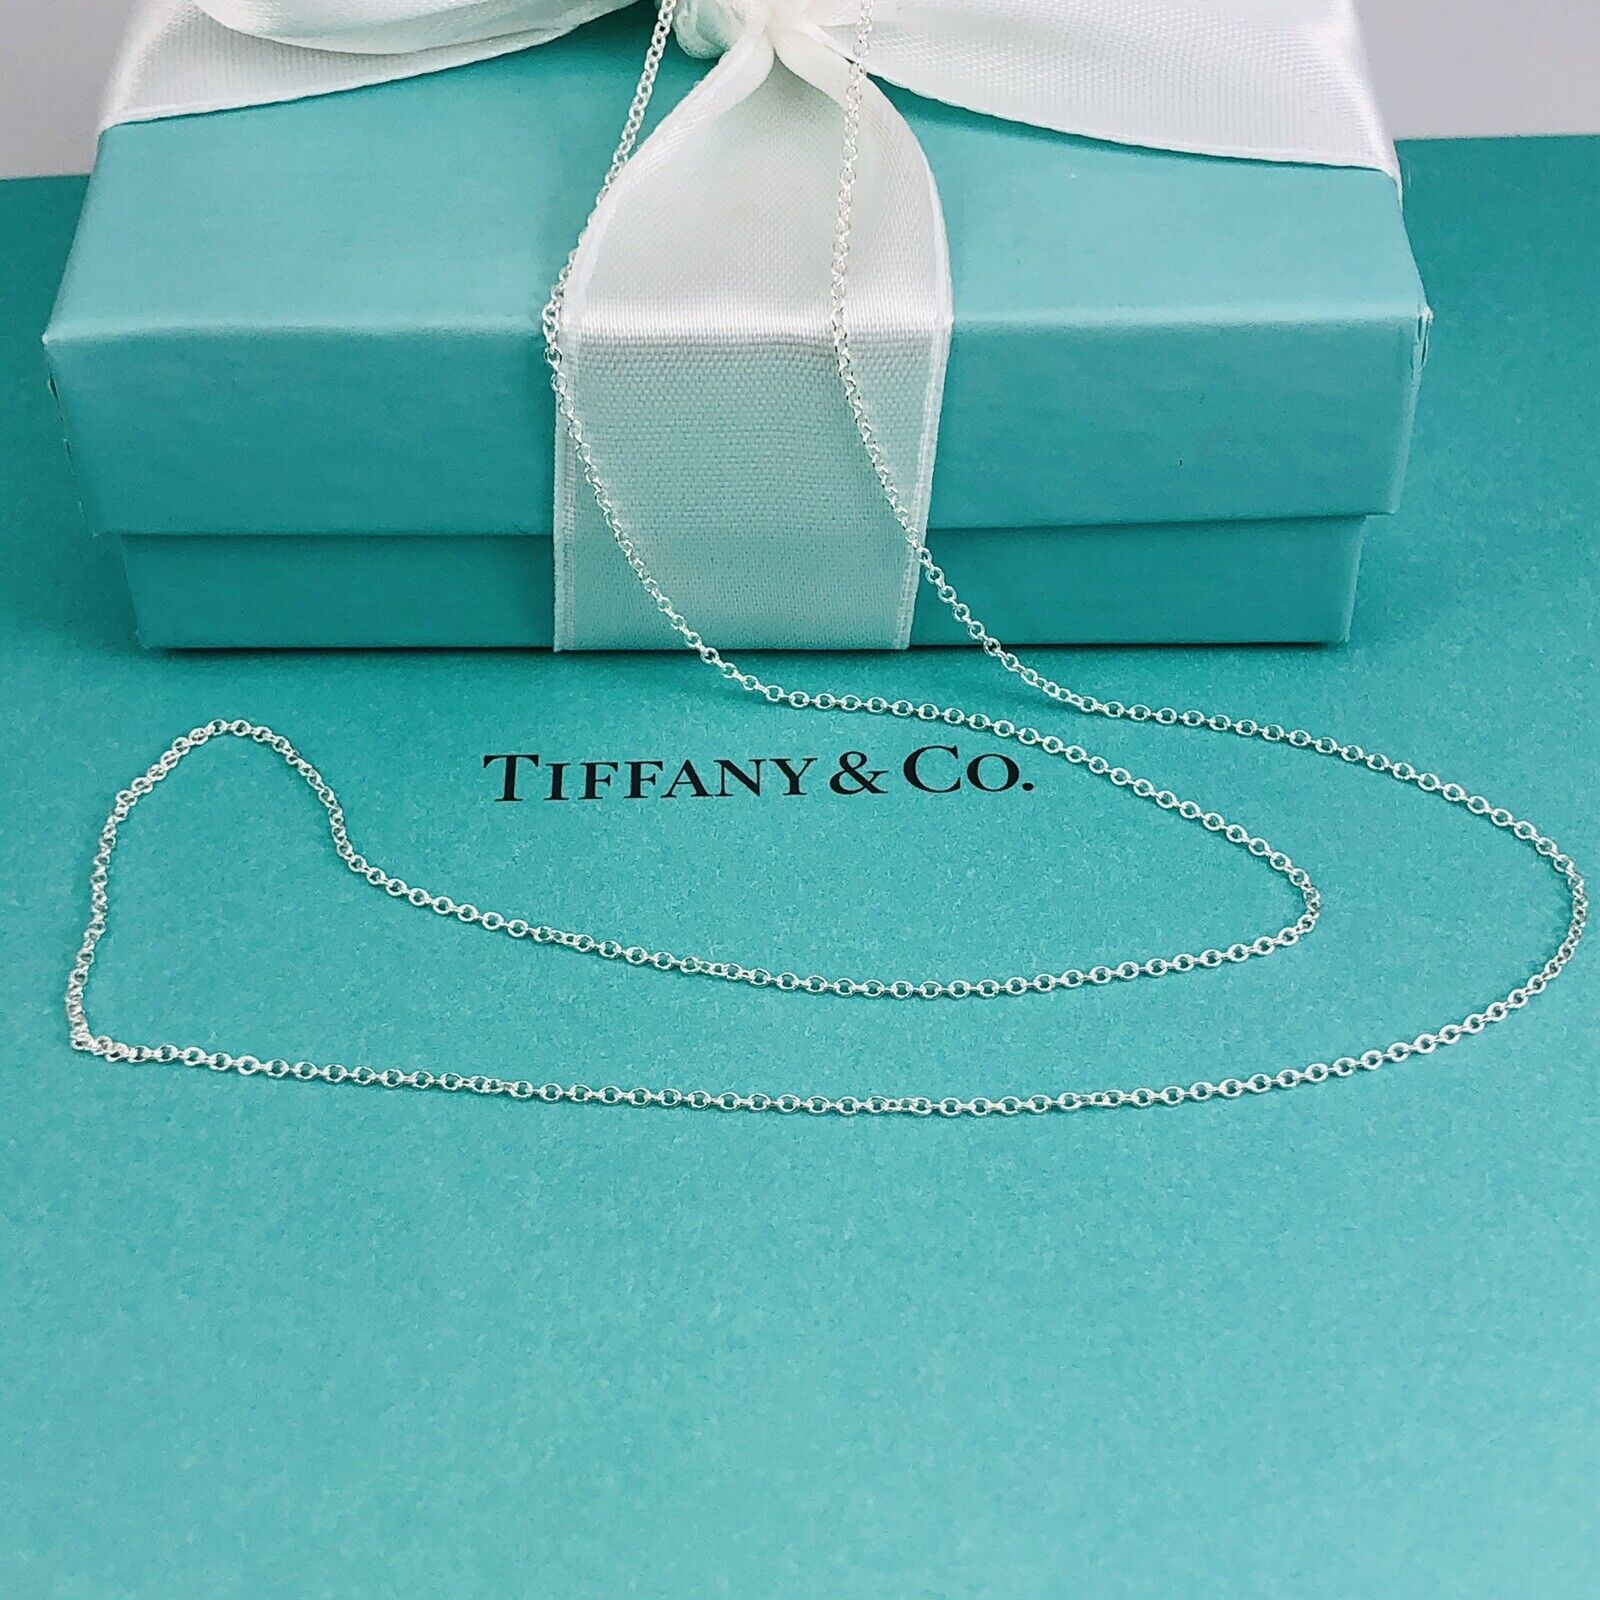 Tiffany & Co 16” Chain Necklace in Sterling Silver Perfect Condition FREE ship - $109.99